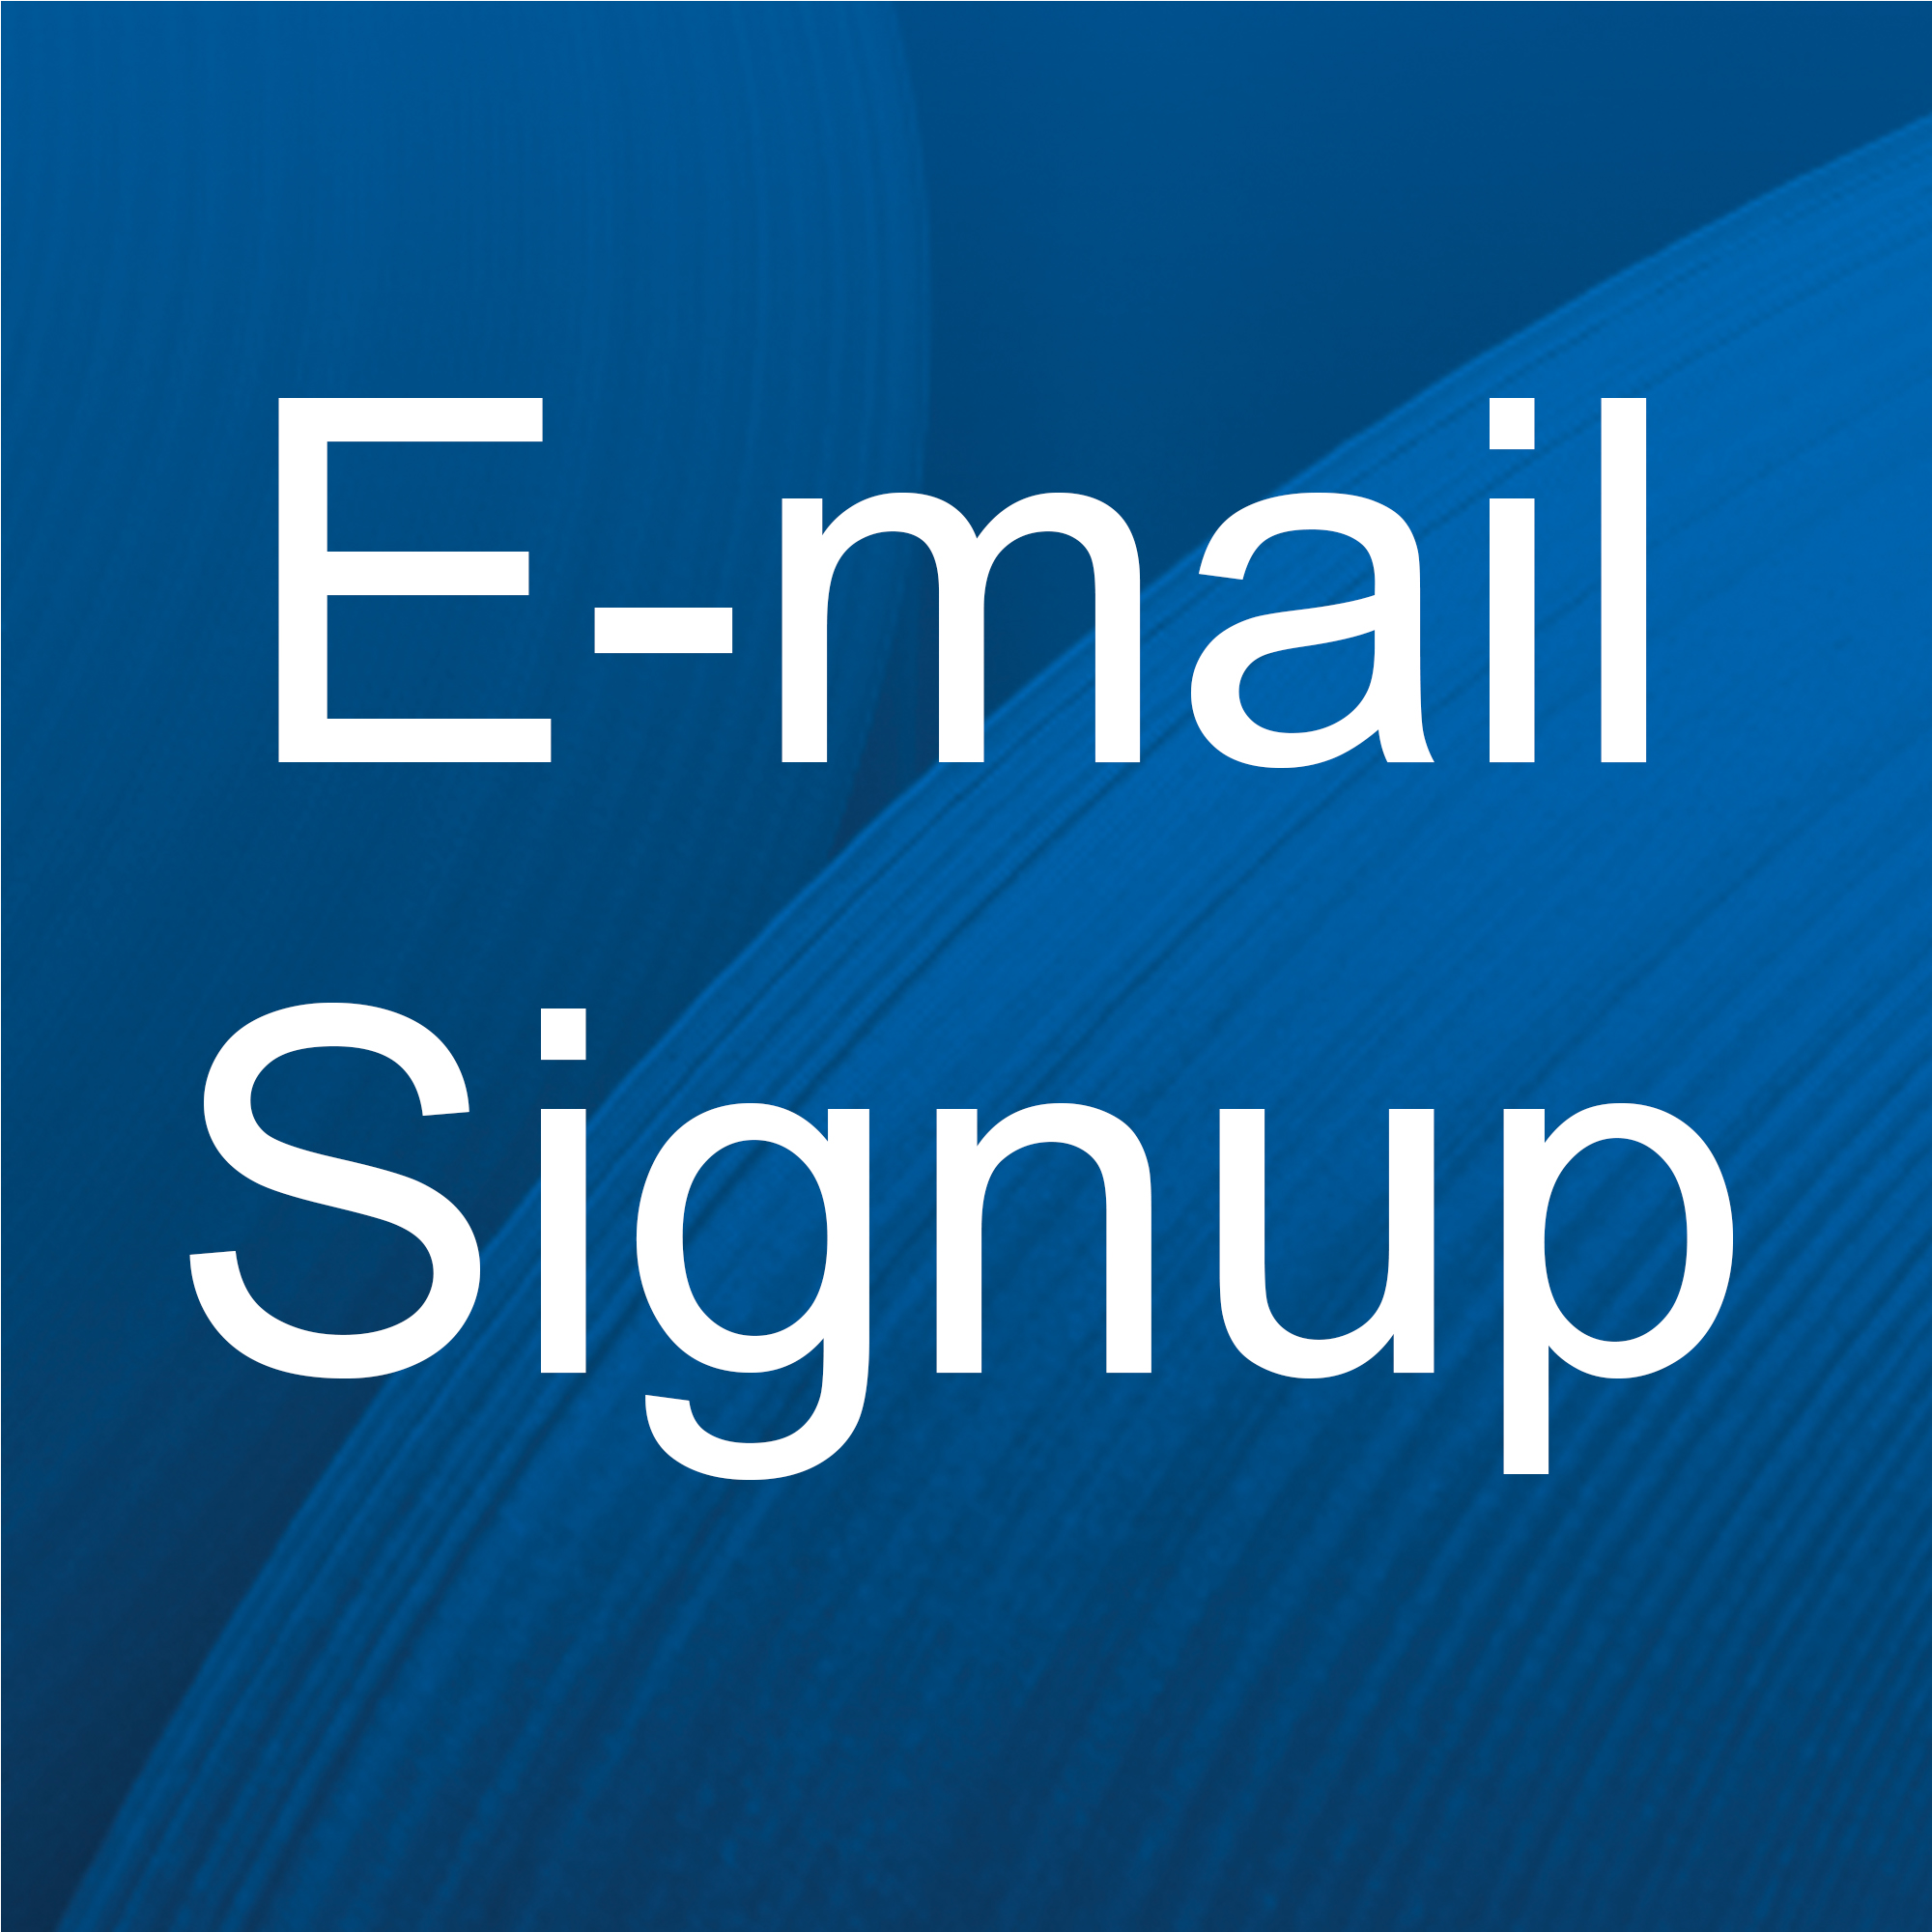 E-mail Signup